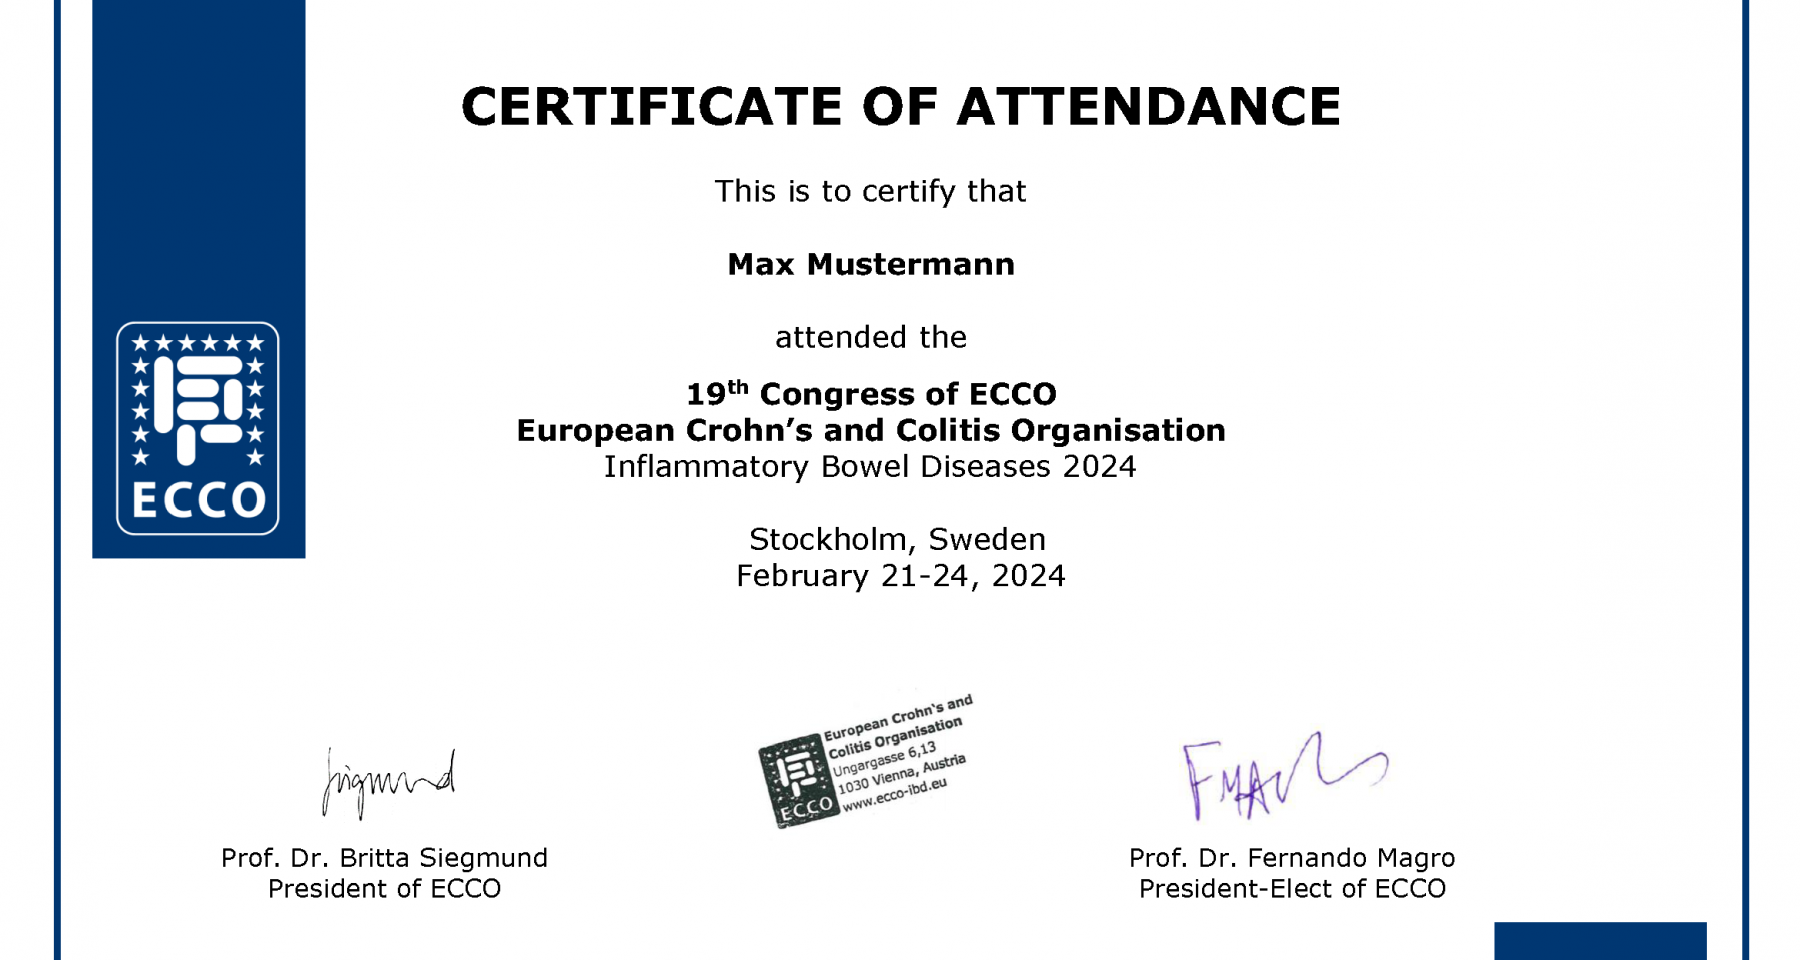 Don't forget to download your ECCO'24 Certificate of attendance